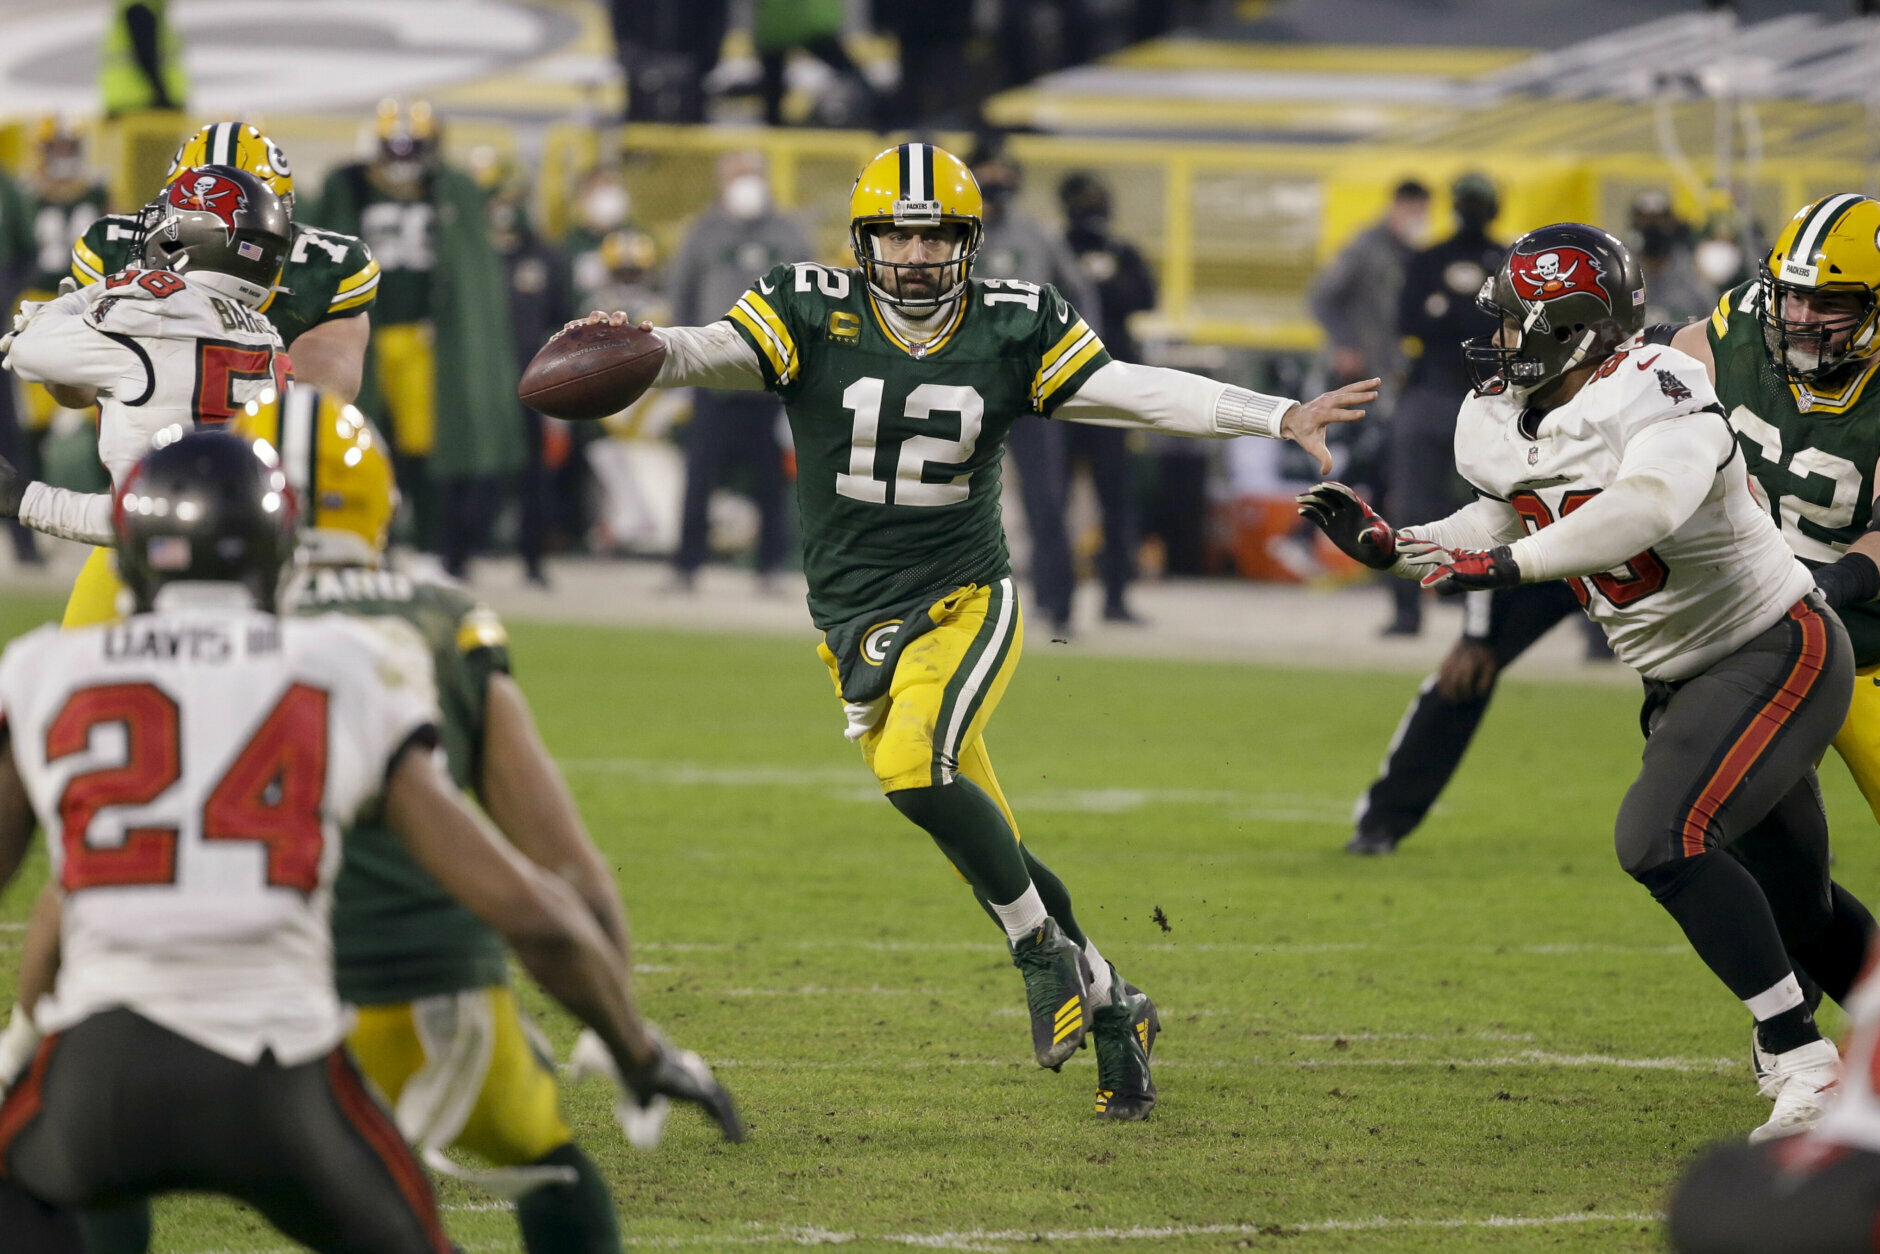 <p><b><i>Bucs 31</i></b><br />
<b><i>Packers 26</i></b></p>
<p>Green Bay blew it.</p>
<p><a href="https://profootballtalk.nbcsports.com/2021/01/24/aaron-rodgers-says-there-are-a-lot-of-uncertain-futures-myself-included/">In what might be Aaron Rodgers&#8217; final act as the Packers QB</a>, he should have run in a potential game-tying touchdown &#8230;</p>
<blockquote class="twitter-tweet">
<p dir="ltr" lang="en">Rodgers blew it. This is a touchdown if he runs. <a href="https://t.co/KPOlH1sXFz">pic.twitter.com/KPOlH1sXFz</a></p>
<p>— Michael David Smith (@MichaelDavSmith) <a href="https://twitter.com/MichaelDavSmith/status/1353478355895676928?ref_src=twsrc%5Etfw">January 24, 2021</a></p></blockquote>
<p><script async src="https://platform.twitter.com/widgets.js" charset="utf-8"></script></p>
<p>&#8230; and Matt LaFleur committed coaching malpractice by taking a meaningless field goal rather than giving his legendary QB another chance to get in the end zone on a goal-to-go situation. The Packers will be haunted by that, and the inability to cash in any of Tom Brady&#8217;s three interceptions for points that could have rendered that entire late-game disaster moot.</p>
<p>But give it up for Bruce Arians and the GOAT. <a href="https://wtop.com/nfl/2021/01/trio-of-black-assistants-make-history-as-bucs-coordinators/" target="_blank" rel="noopener">Arians&#8217; commitment to diversity</a> has paid off big dividends, and Brady&#8217;s legend now includes the first case of home-field advantage in the Super Bowl in what is his 10th appearance on football&#8217;s biggest stage. Hopefully, more will be made about finally giving minority coaches their due than rehashing Brady&#8217;s obvious status as the most decorated player in NFL history.</p>
